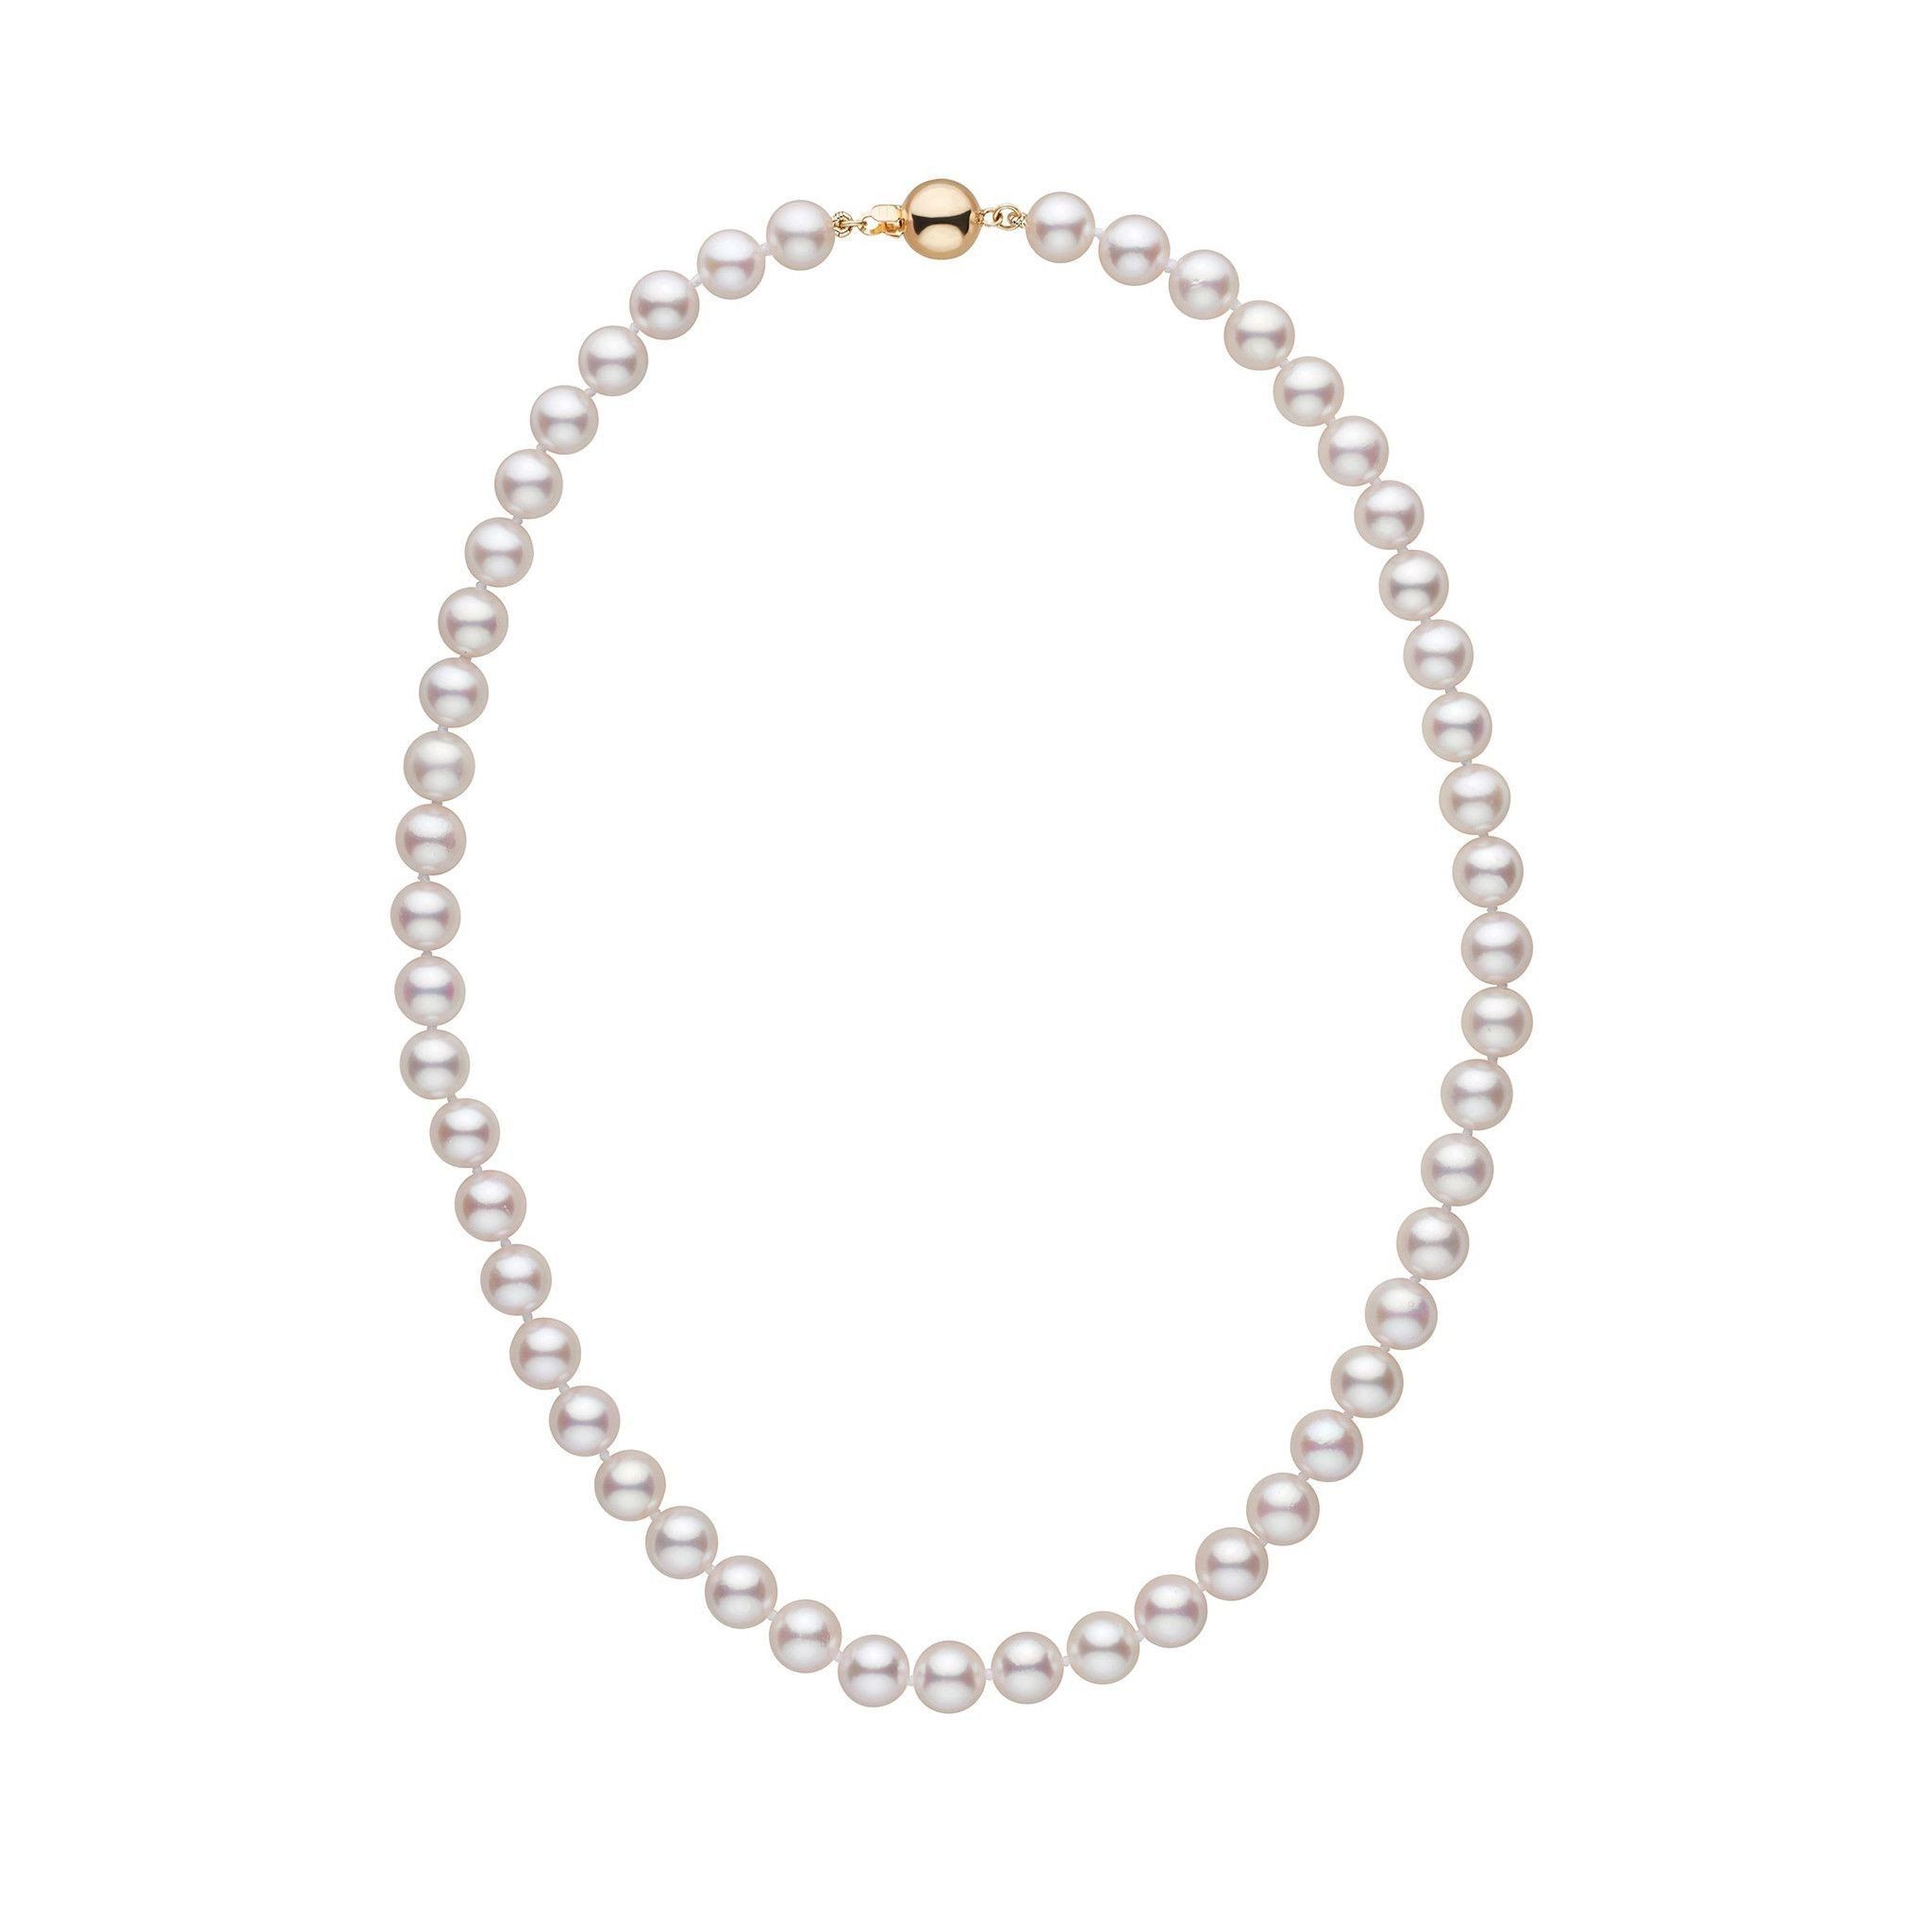 7.5-8.0 mm 16 inch AAA White Akoya Pearl Necklace  Yellow Gold